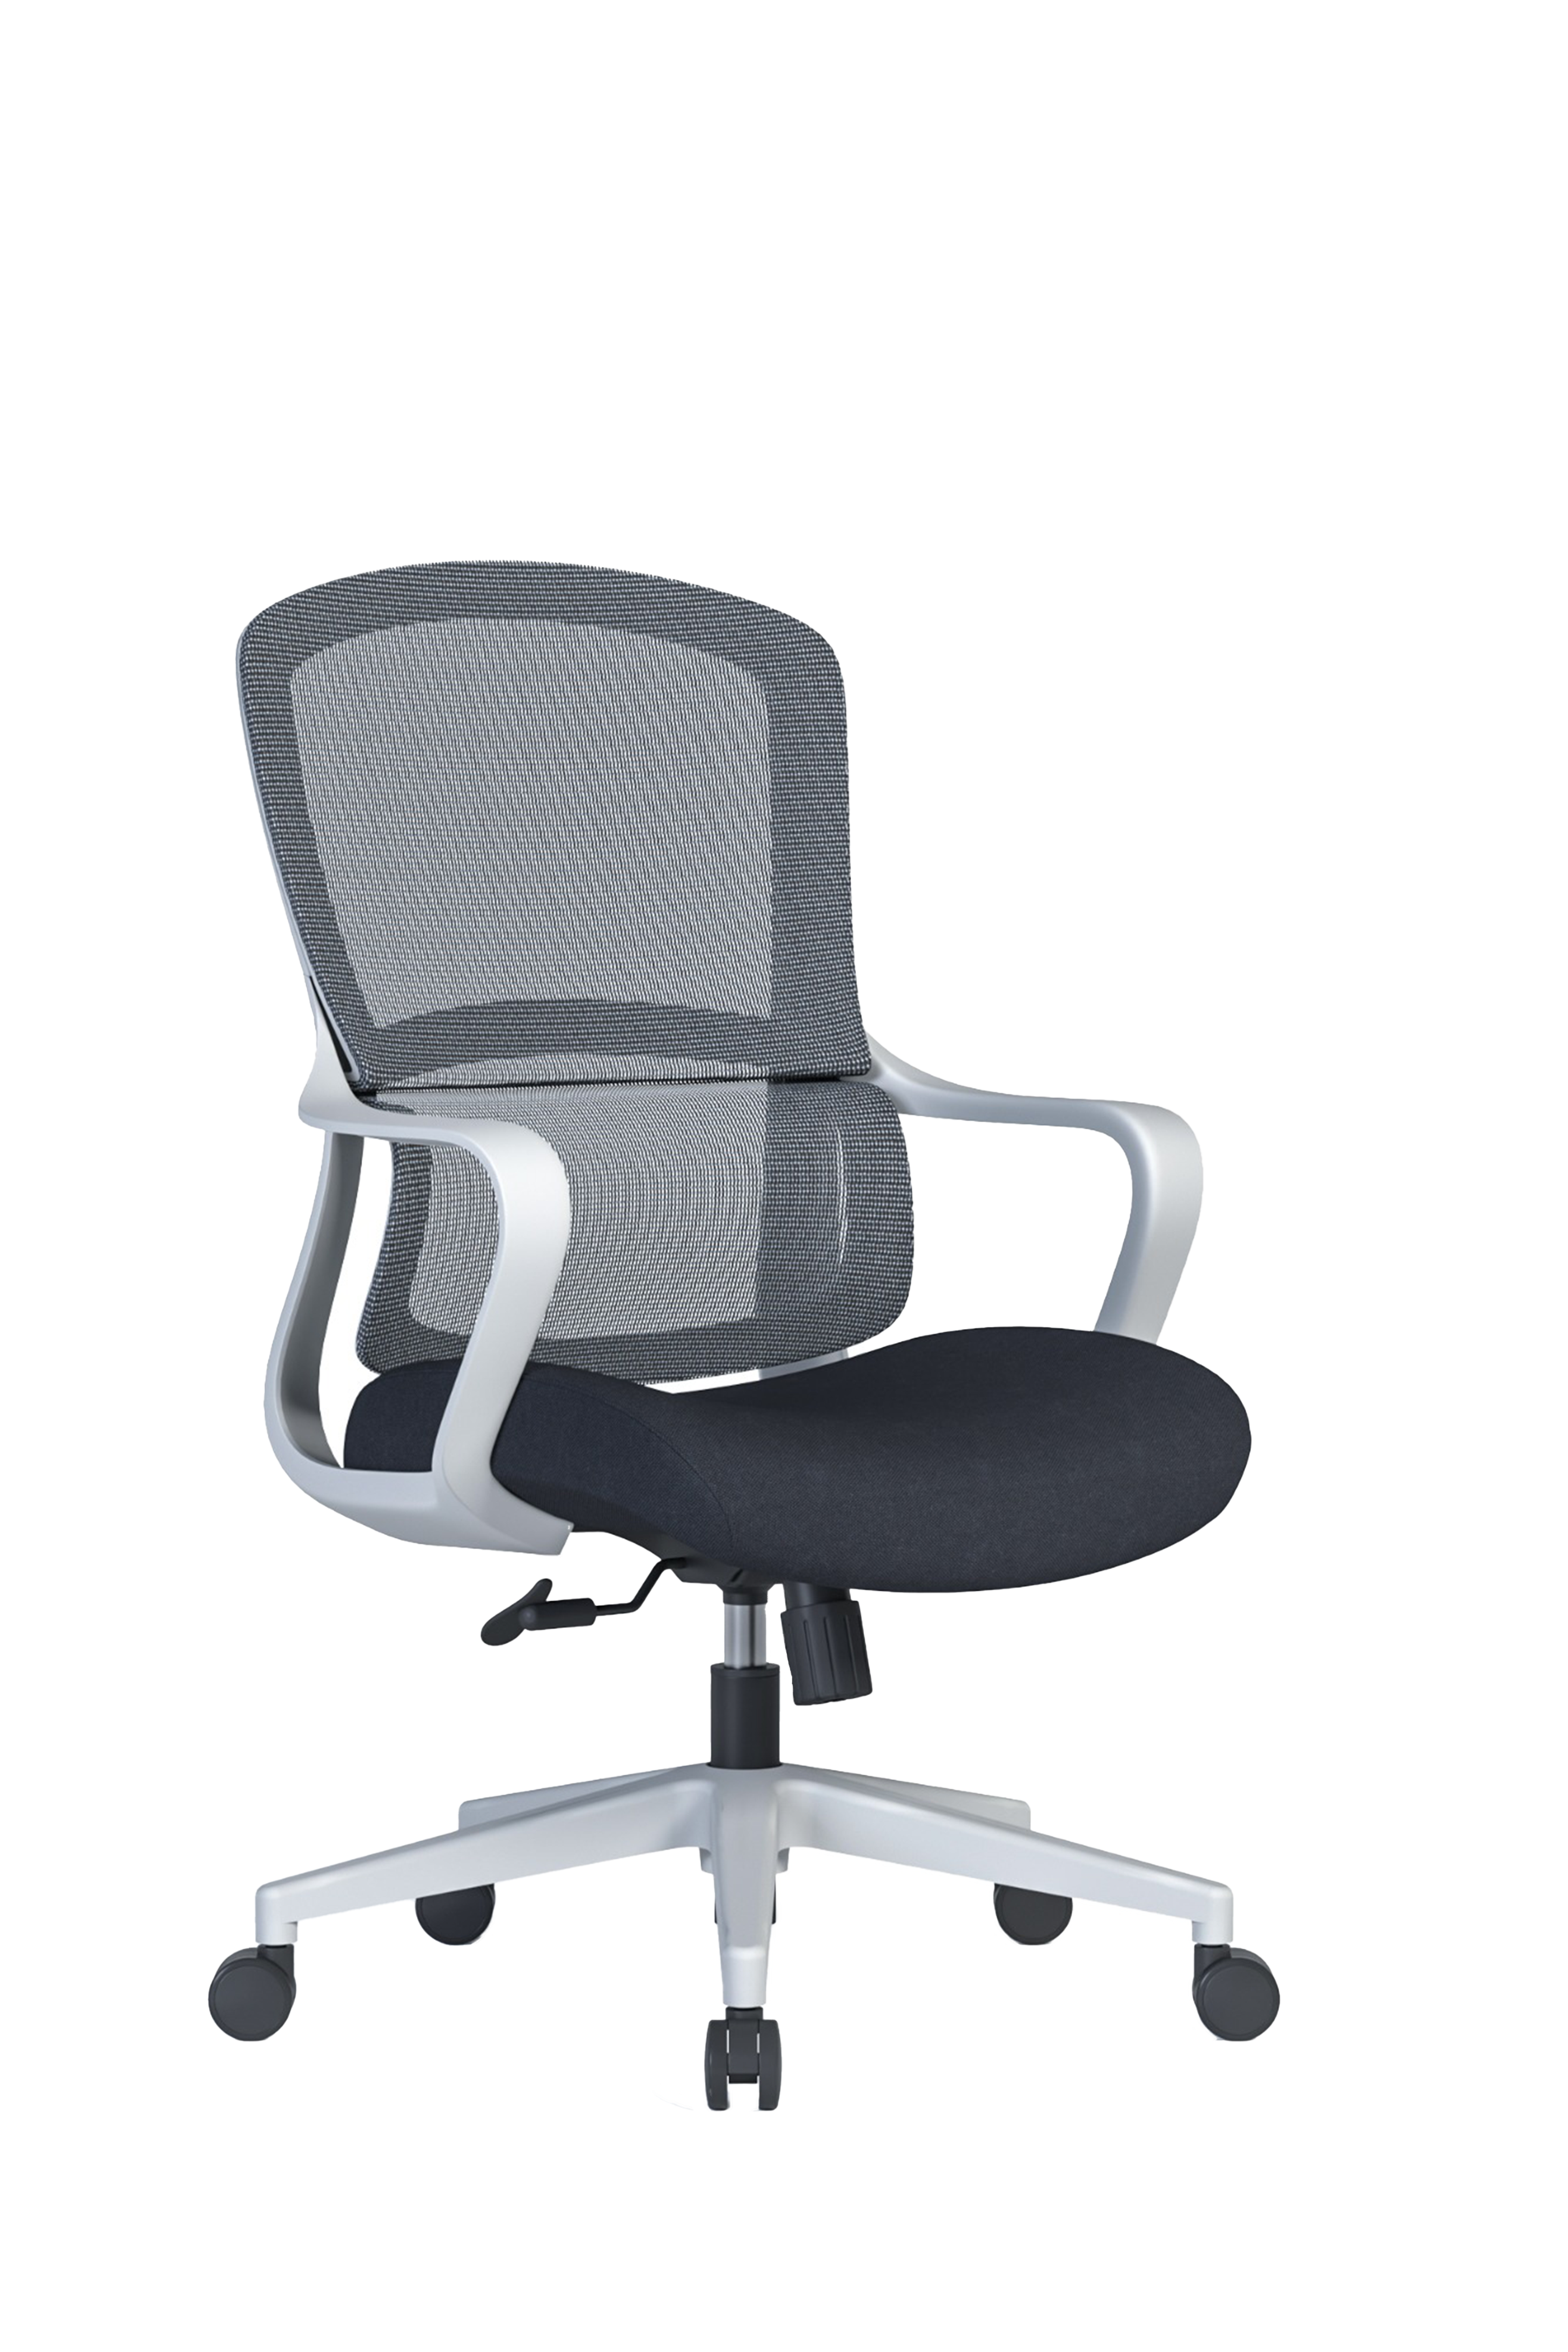 Leo Mid Back Ergonomic Office Chair With Cushion Seat And Nylon Base - Grey